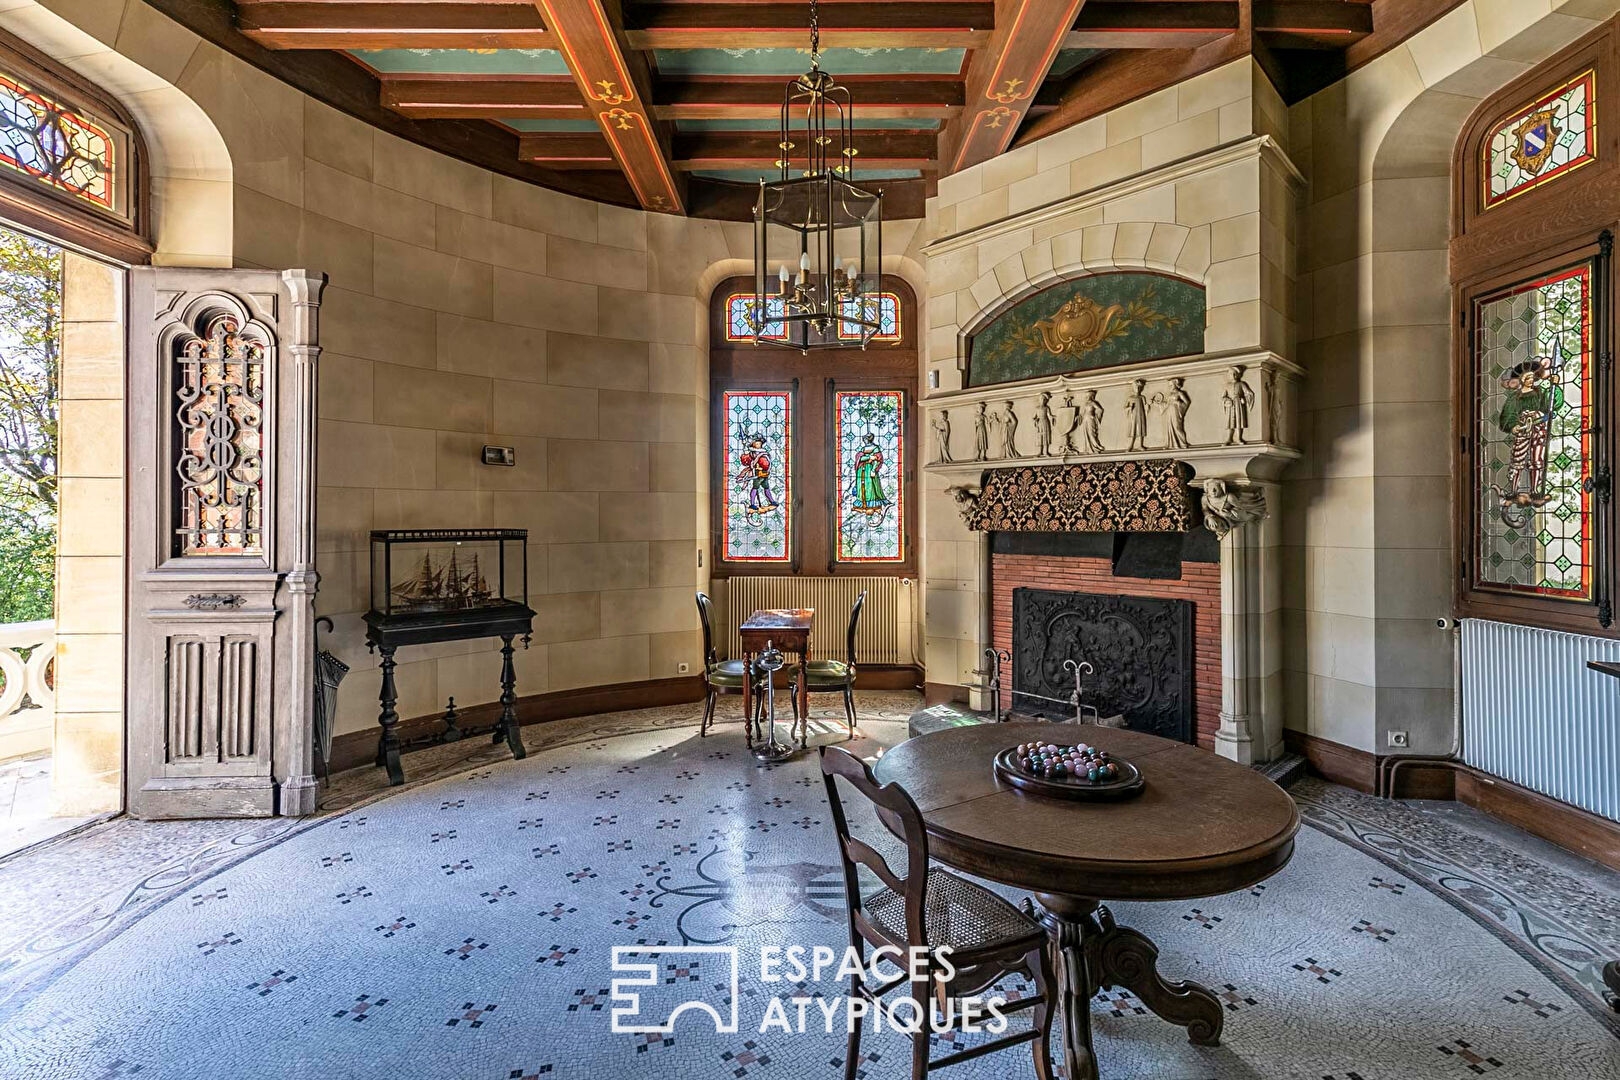 Mansion with a neo-Gothic style tower offering a panoramic view of Plessis-Robinson